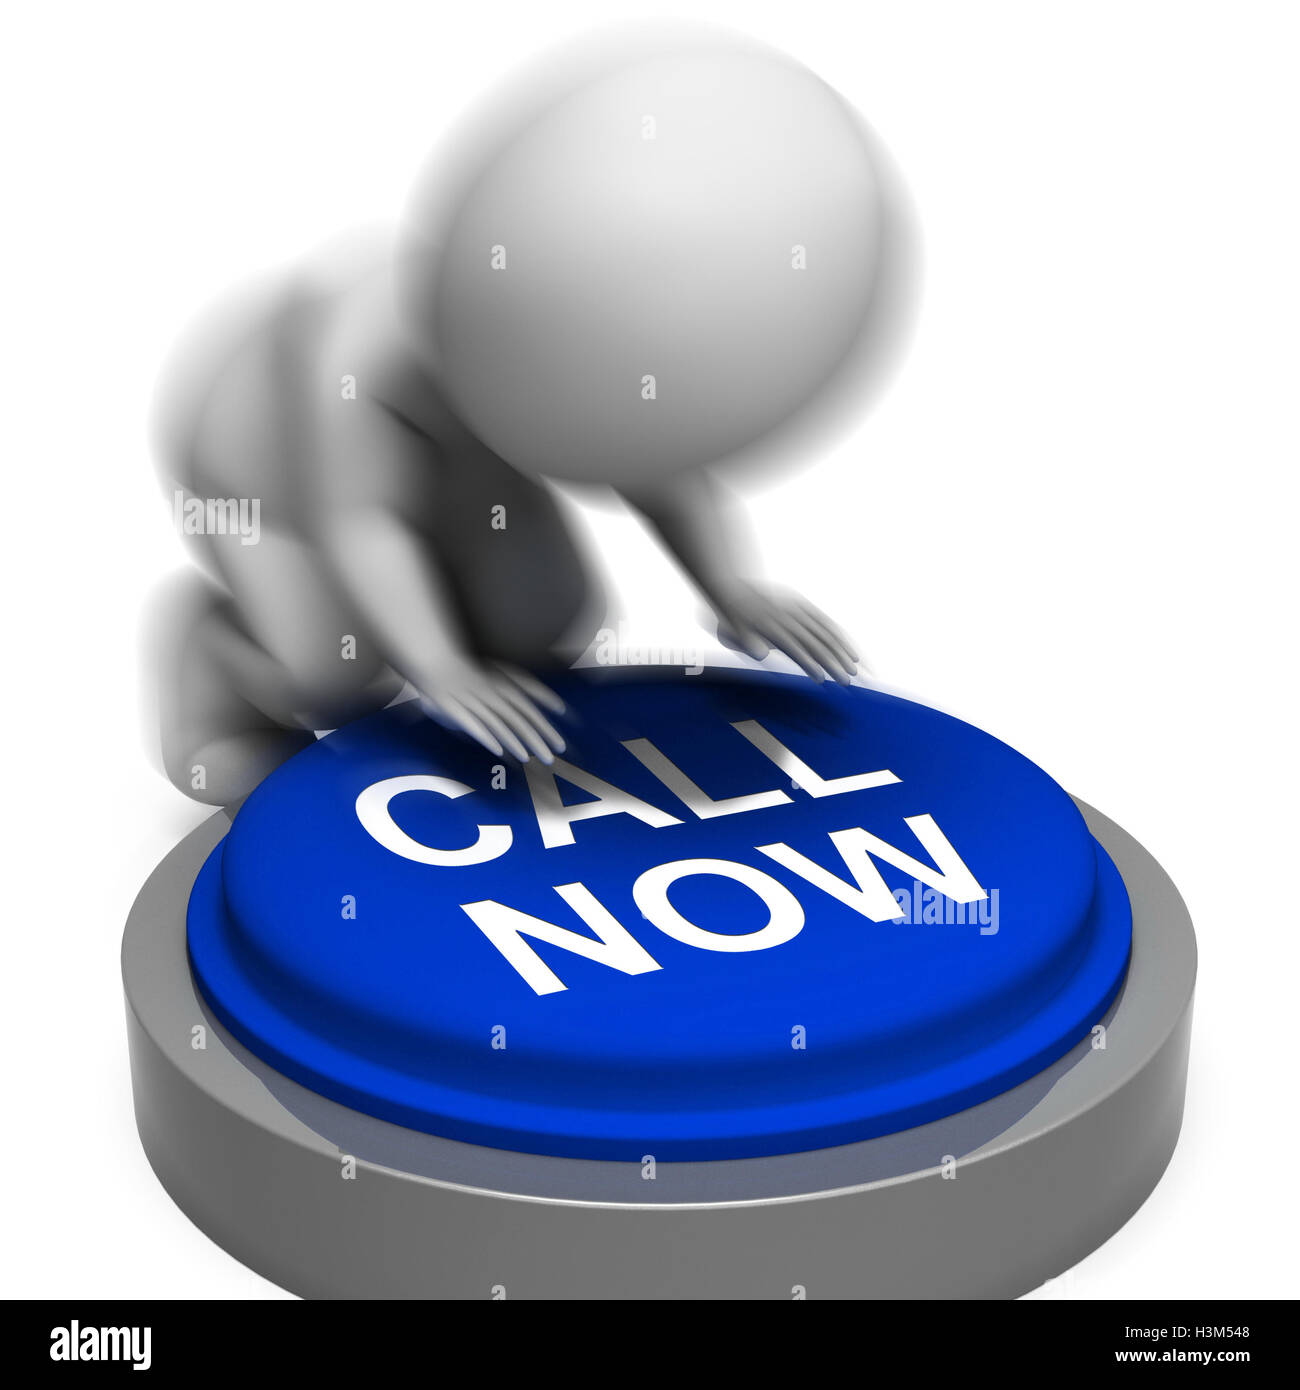 Call Now Pressed Shows Client Support  Phone Number Stock Photo